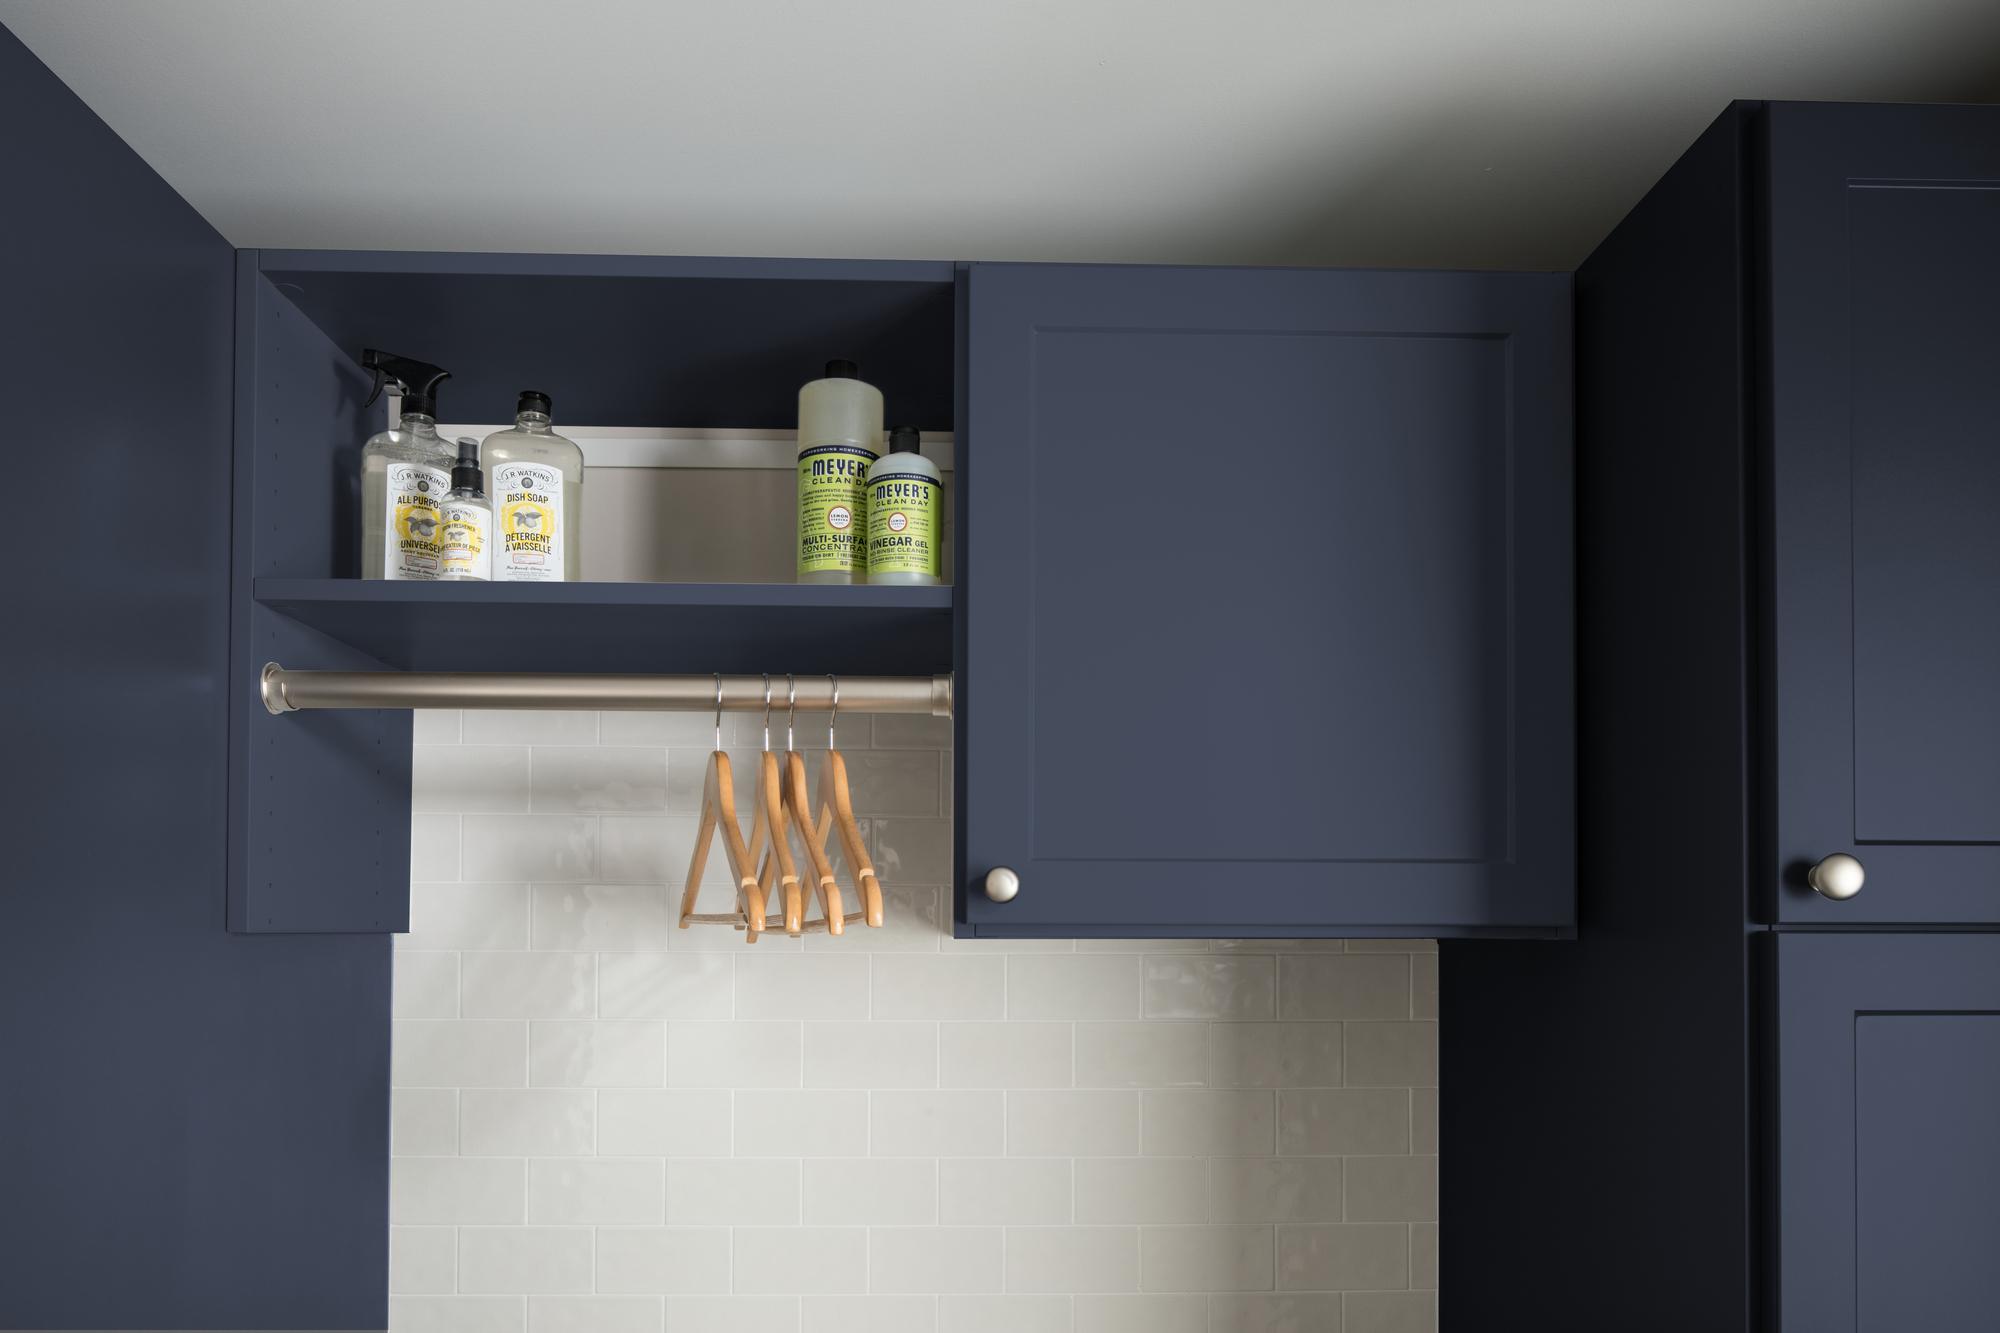 Hanging storage and cupboard storage for navy blue laundry room